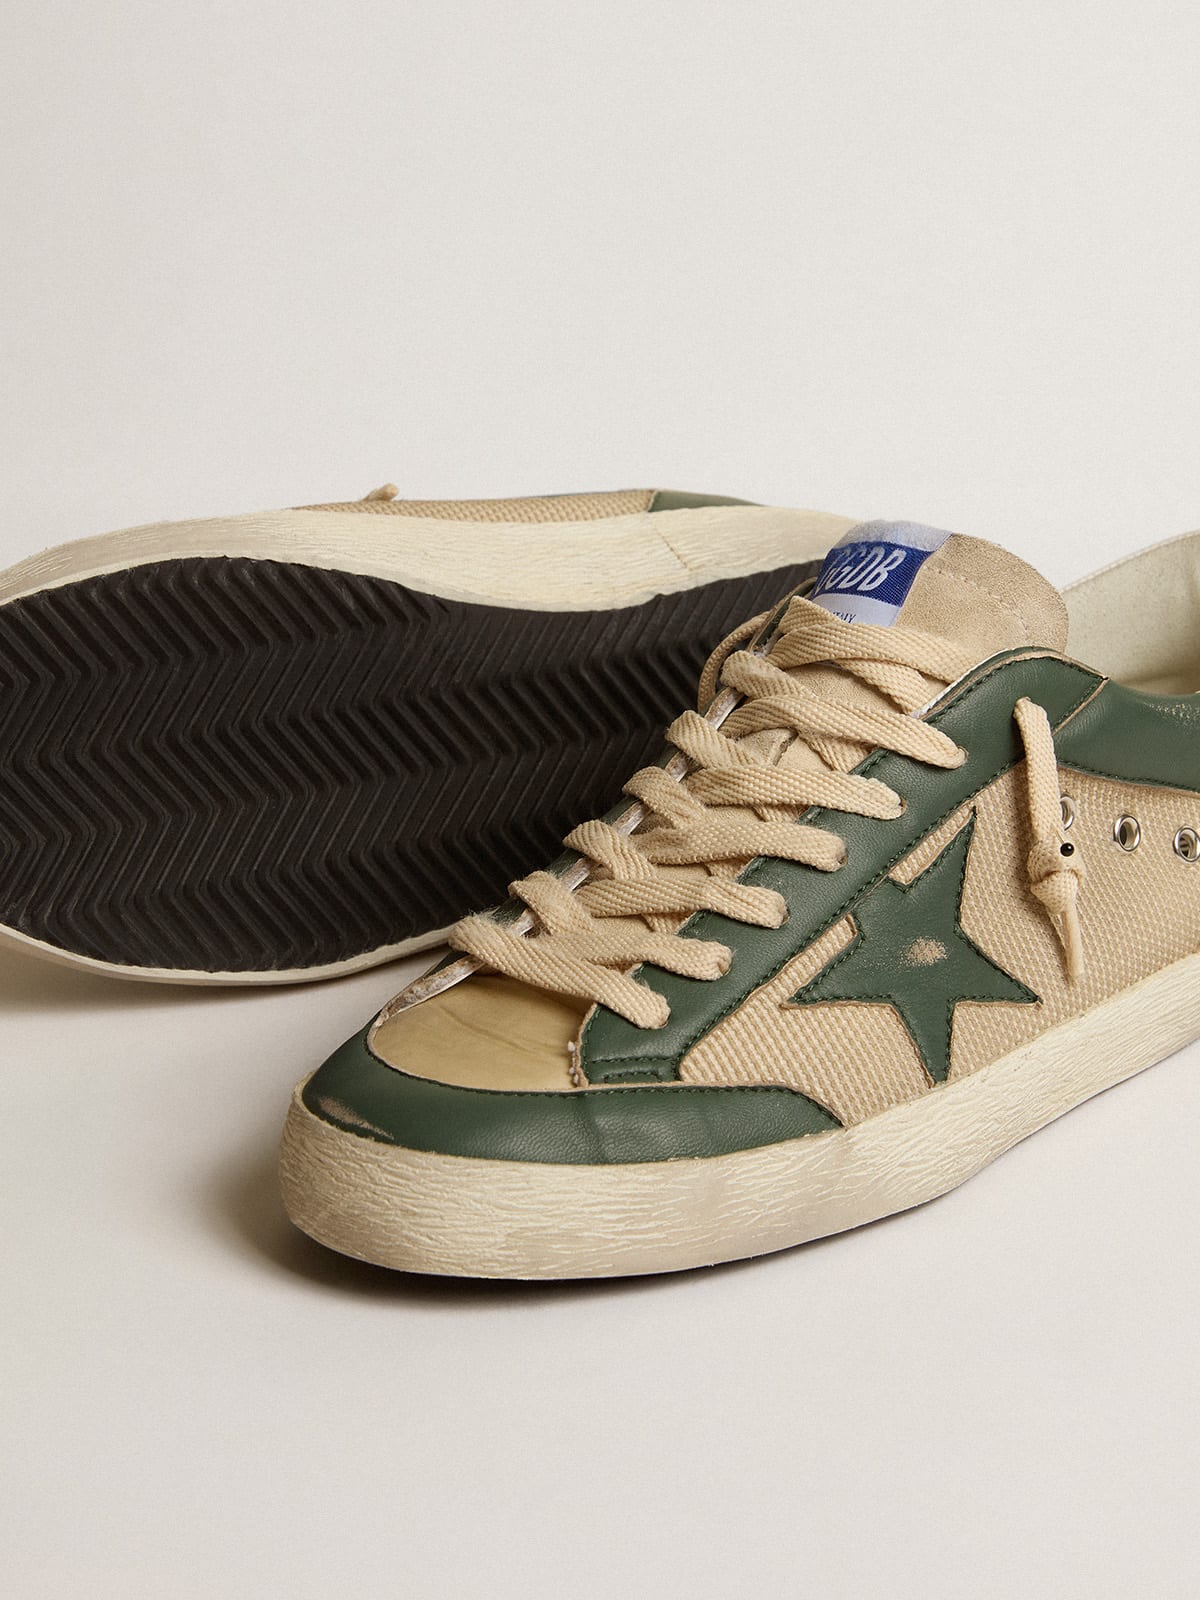 Golden Goose - Super-Star LTD in cream mesh and green nappa with nappa star in 